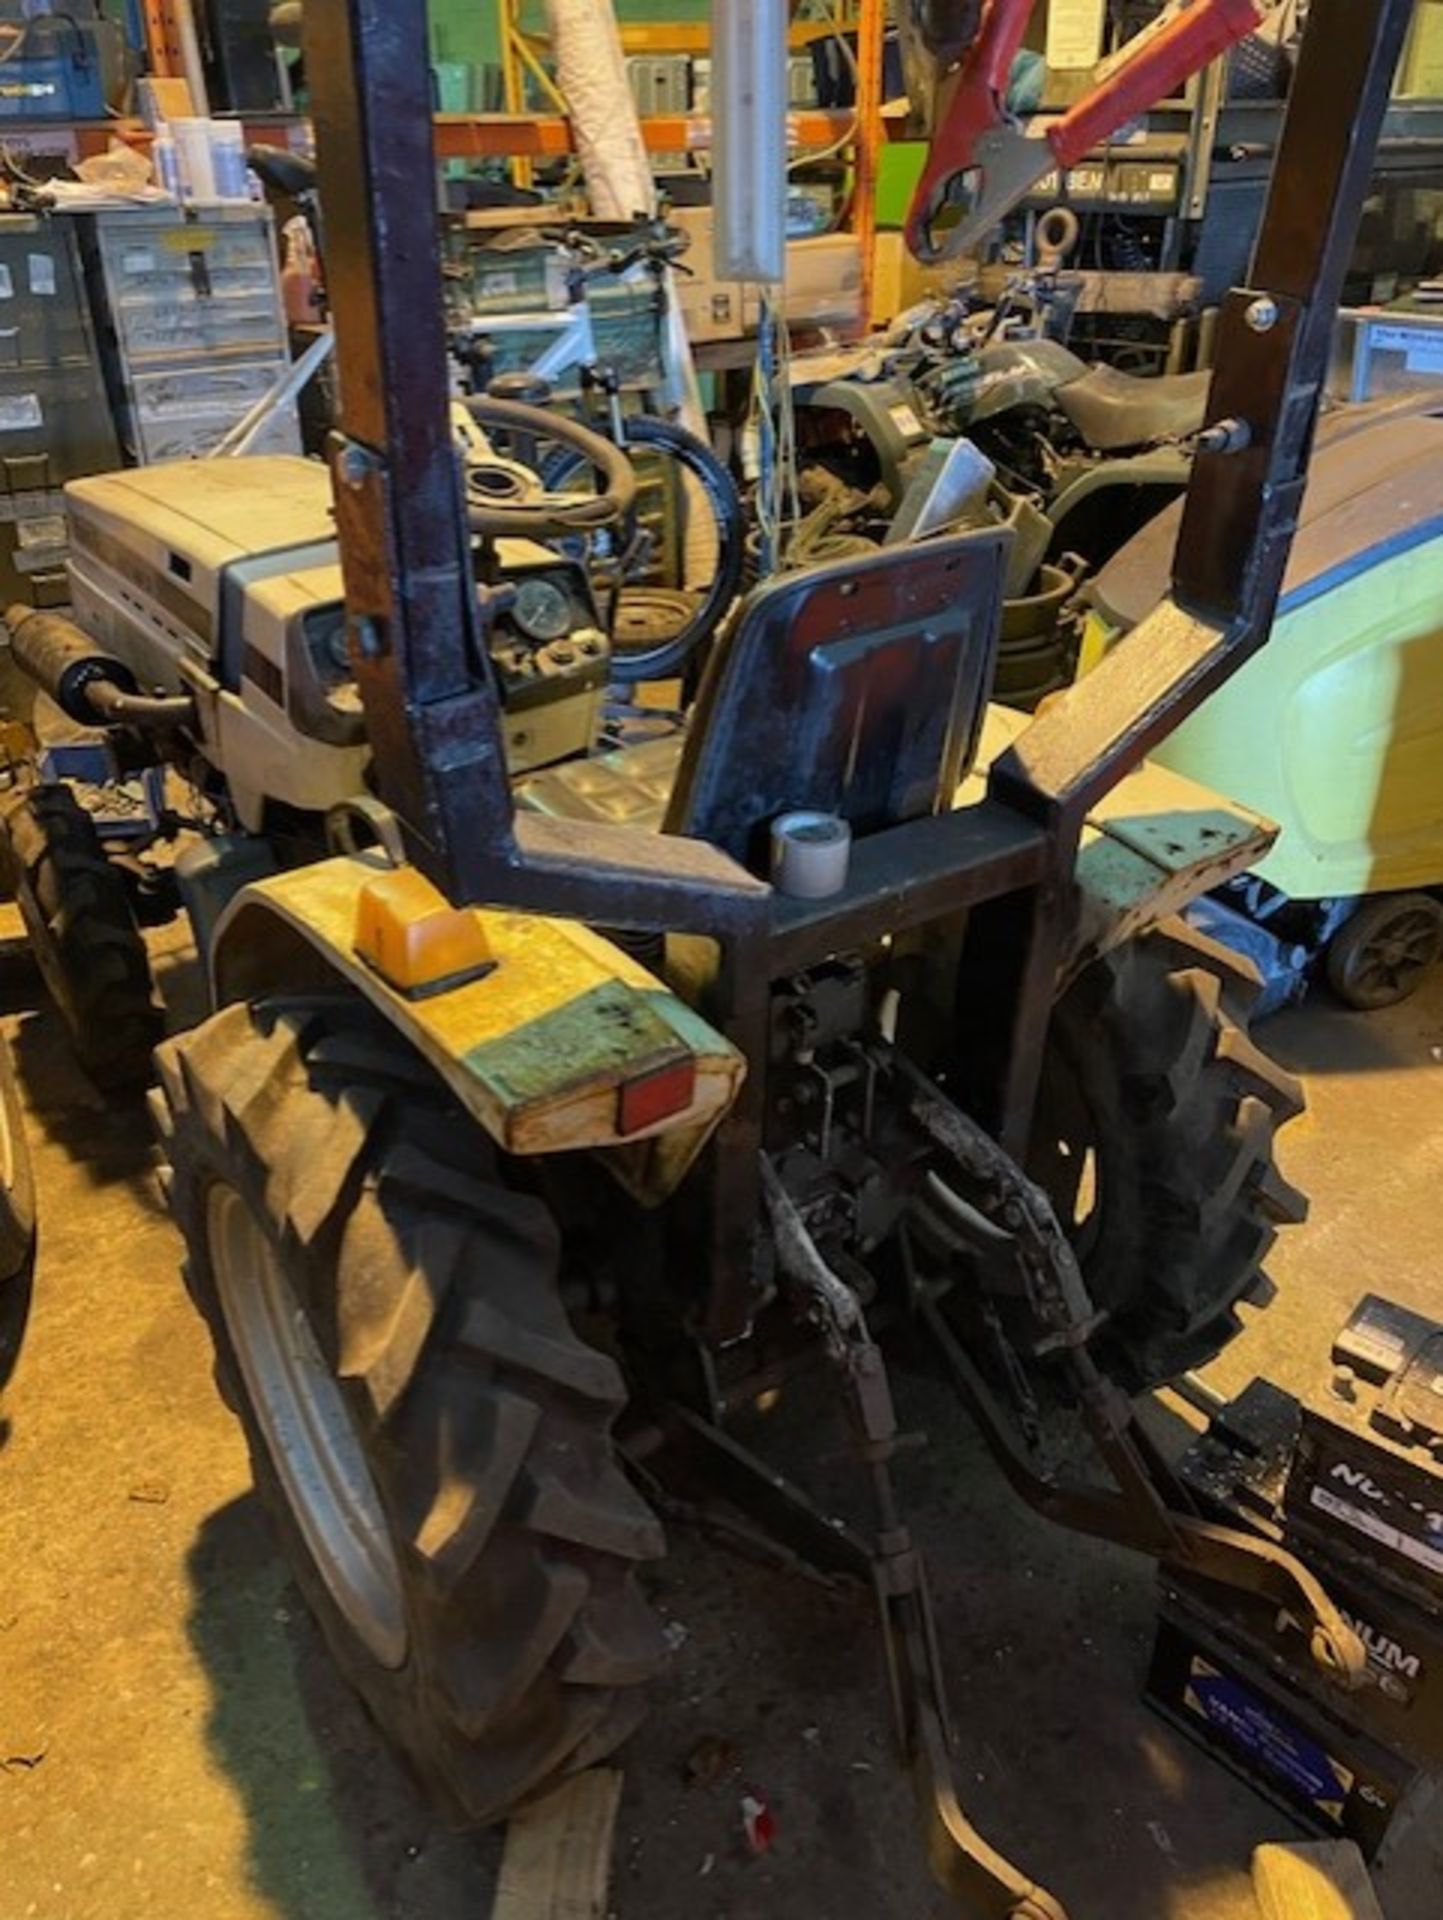 Compact tractor eurotrack iseki 3 cylinder engine it starts but you have to jump start it to get